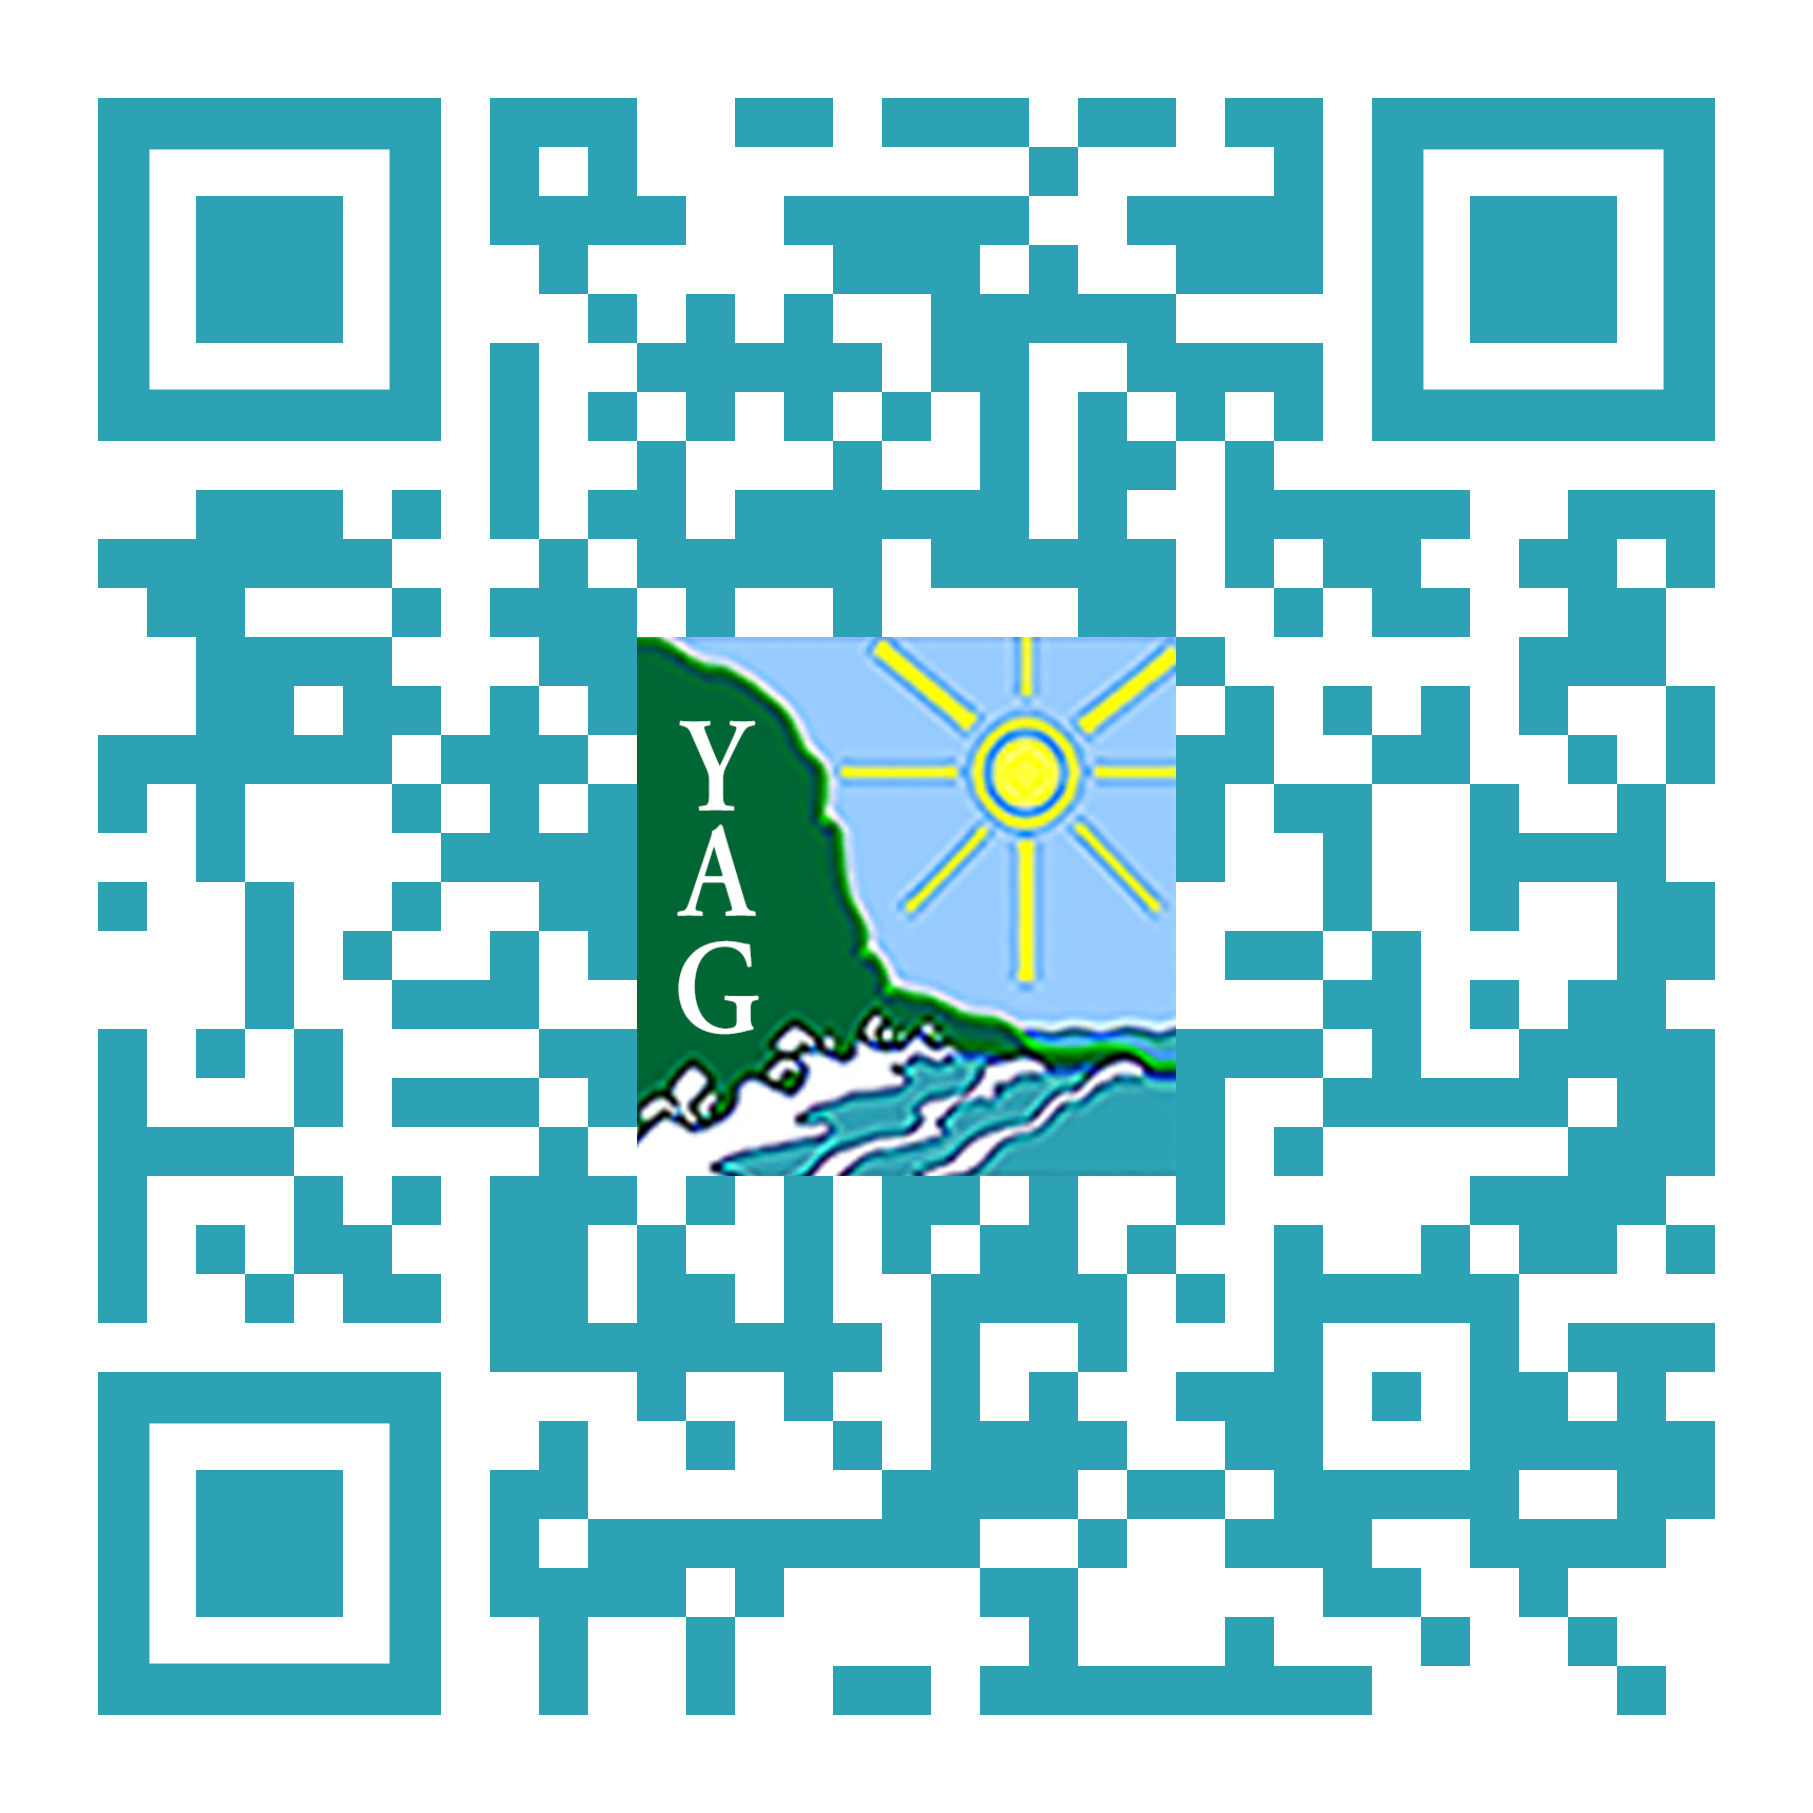 PPP QR code with logo: PollyPlumb.org